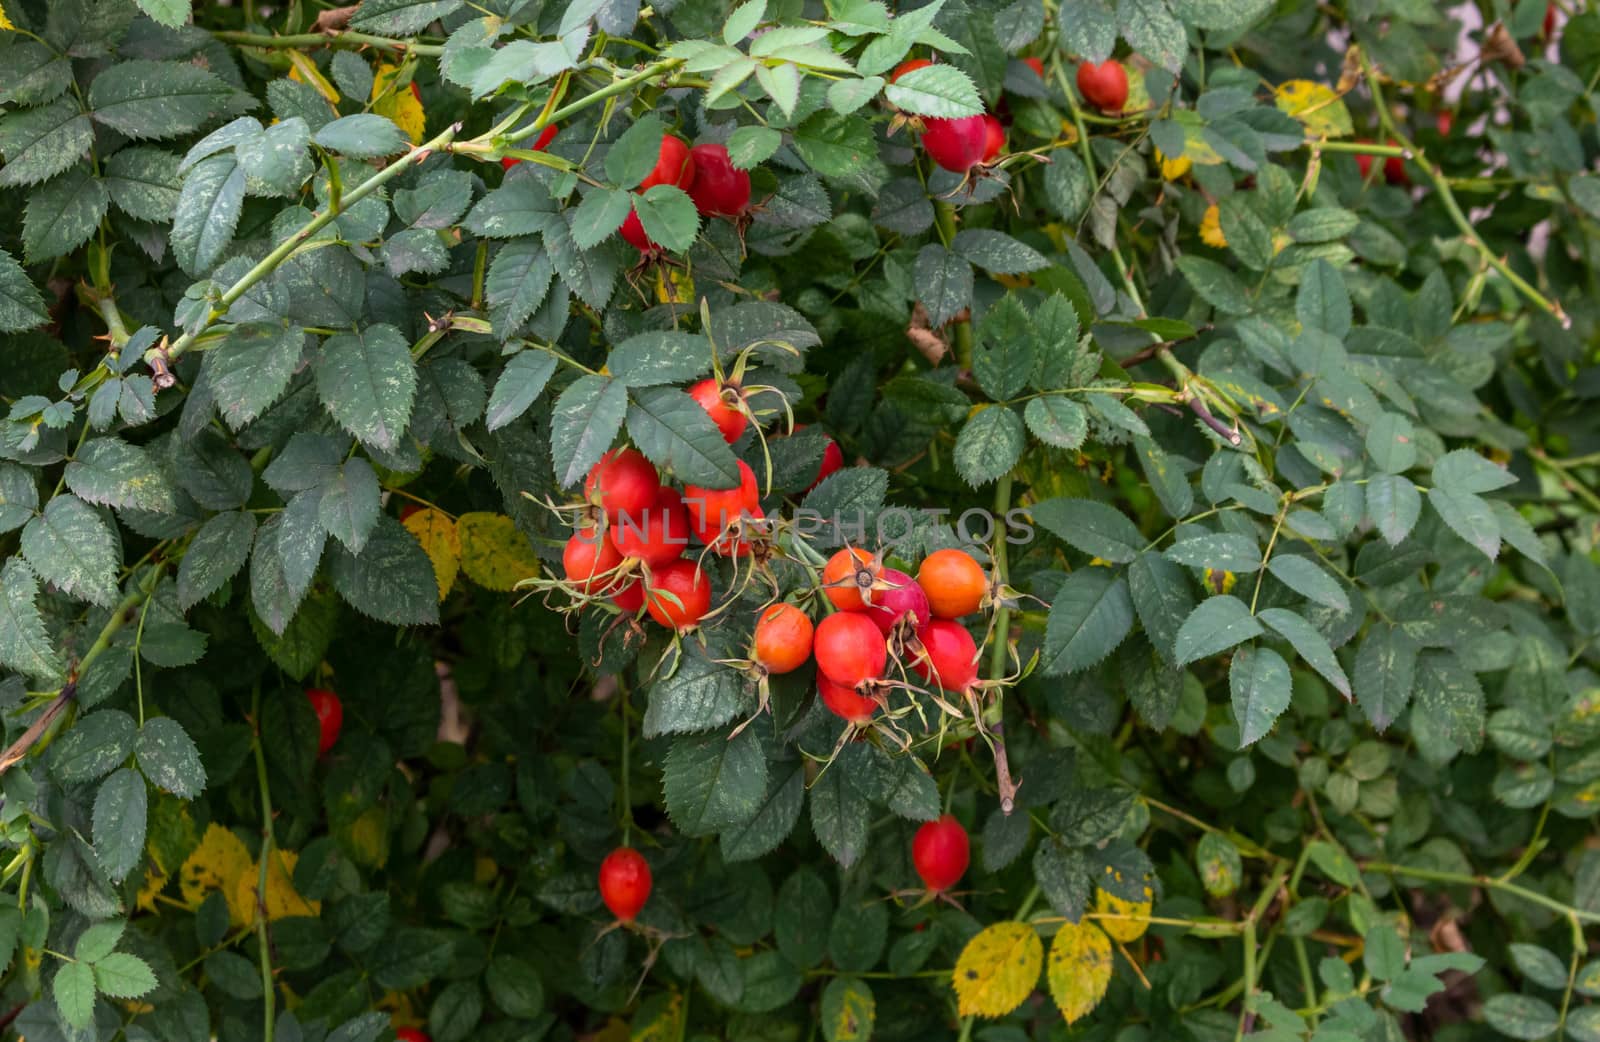 The wild rose Bush.Fresh ripe red rosehip on a green branch with leaves.